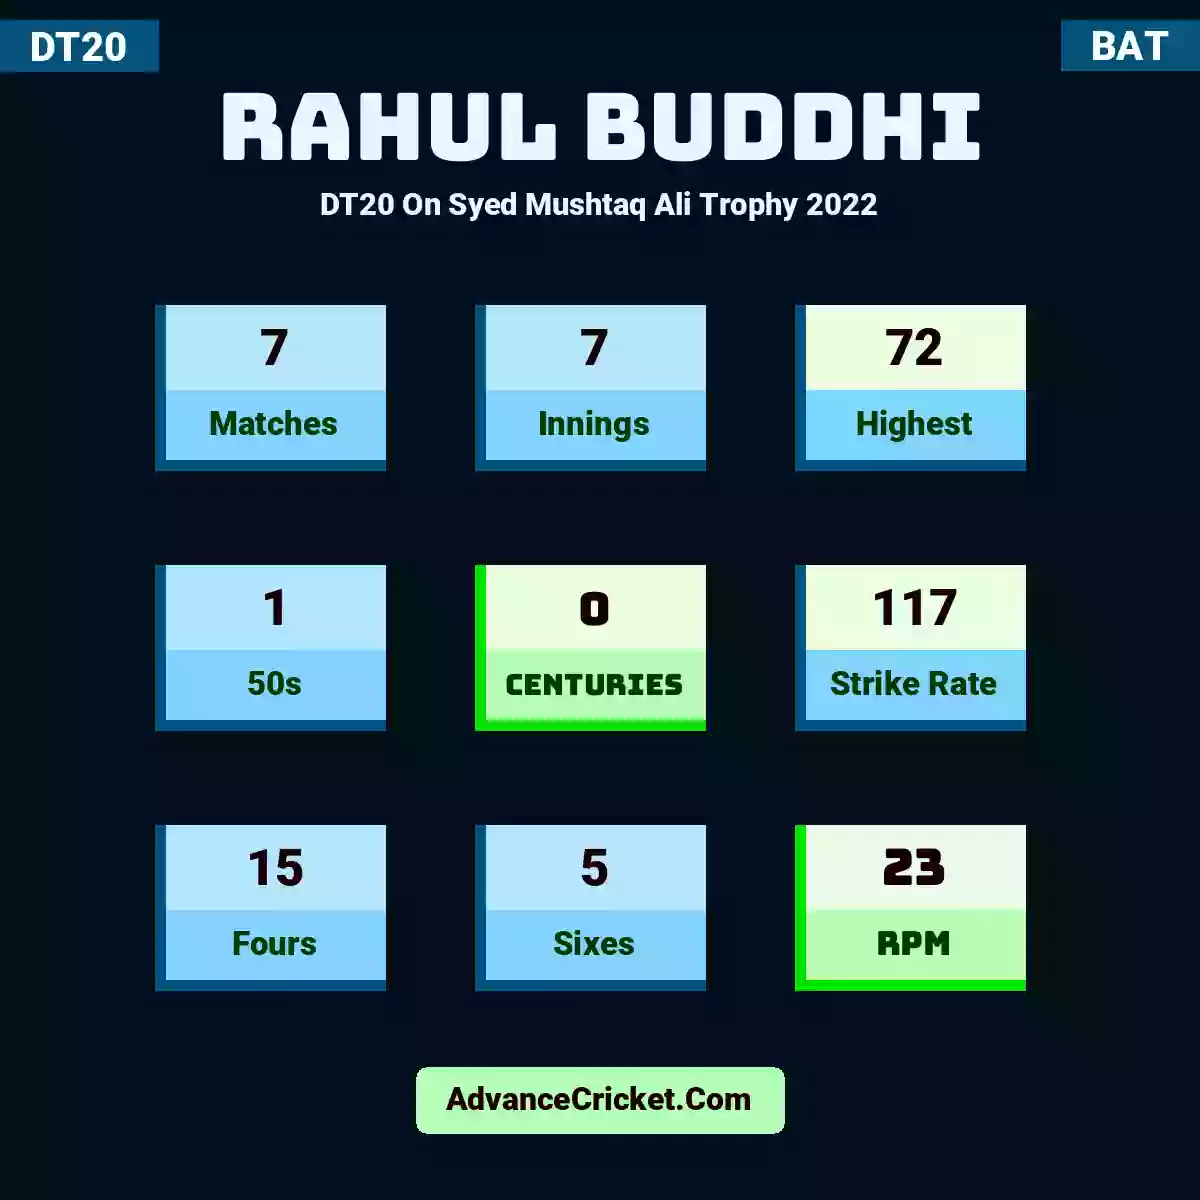 Rahul Buddhi DT20  On Syed Mushtaq Ali Trophy 2022, Rahul Buddhi played 7 matches, scored 72 runs as highest, 1 half-centuries, and 0 centuries, with a strike rate of 117. R.Buddhi hit 15 fours and 5 sixes, with an RPM of 23.